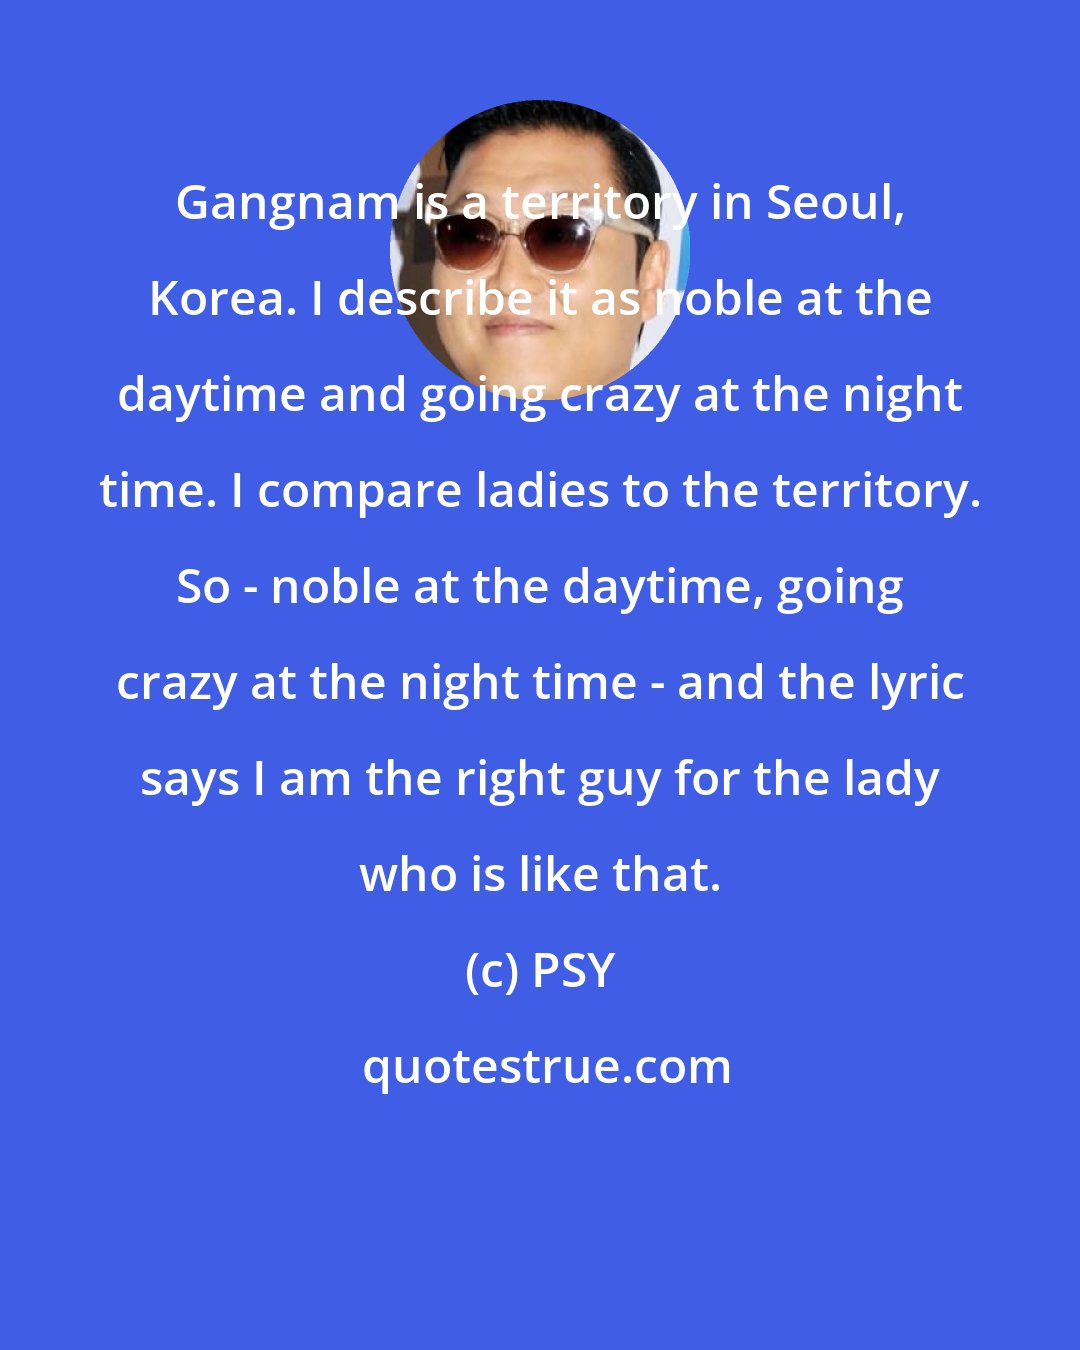 PSY: Gangnam is a territory in Seoul, Korea. I describe it as noble at the daytime and going crazy at the night time. I compare ladies to the territory. So - noble at the daytime, going crazy at the night time - and the lyric says I am the right guy for the lady who is like that.